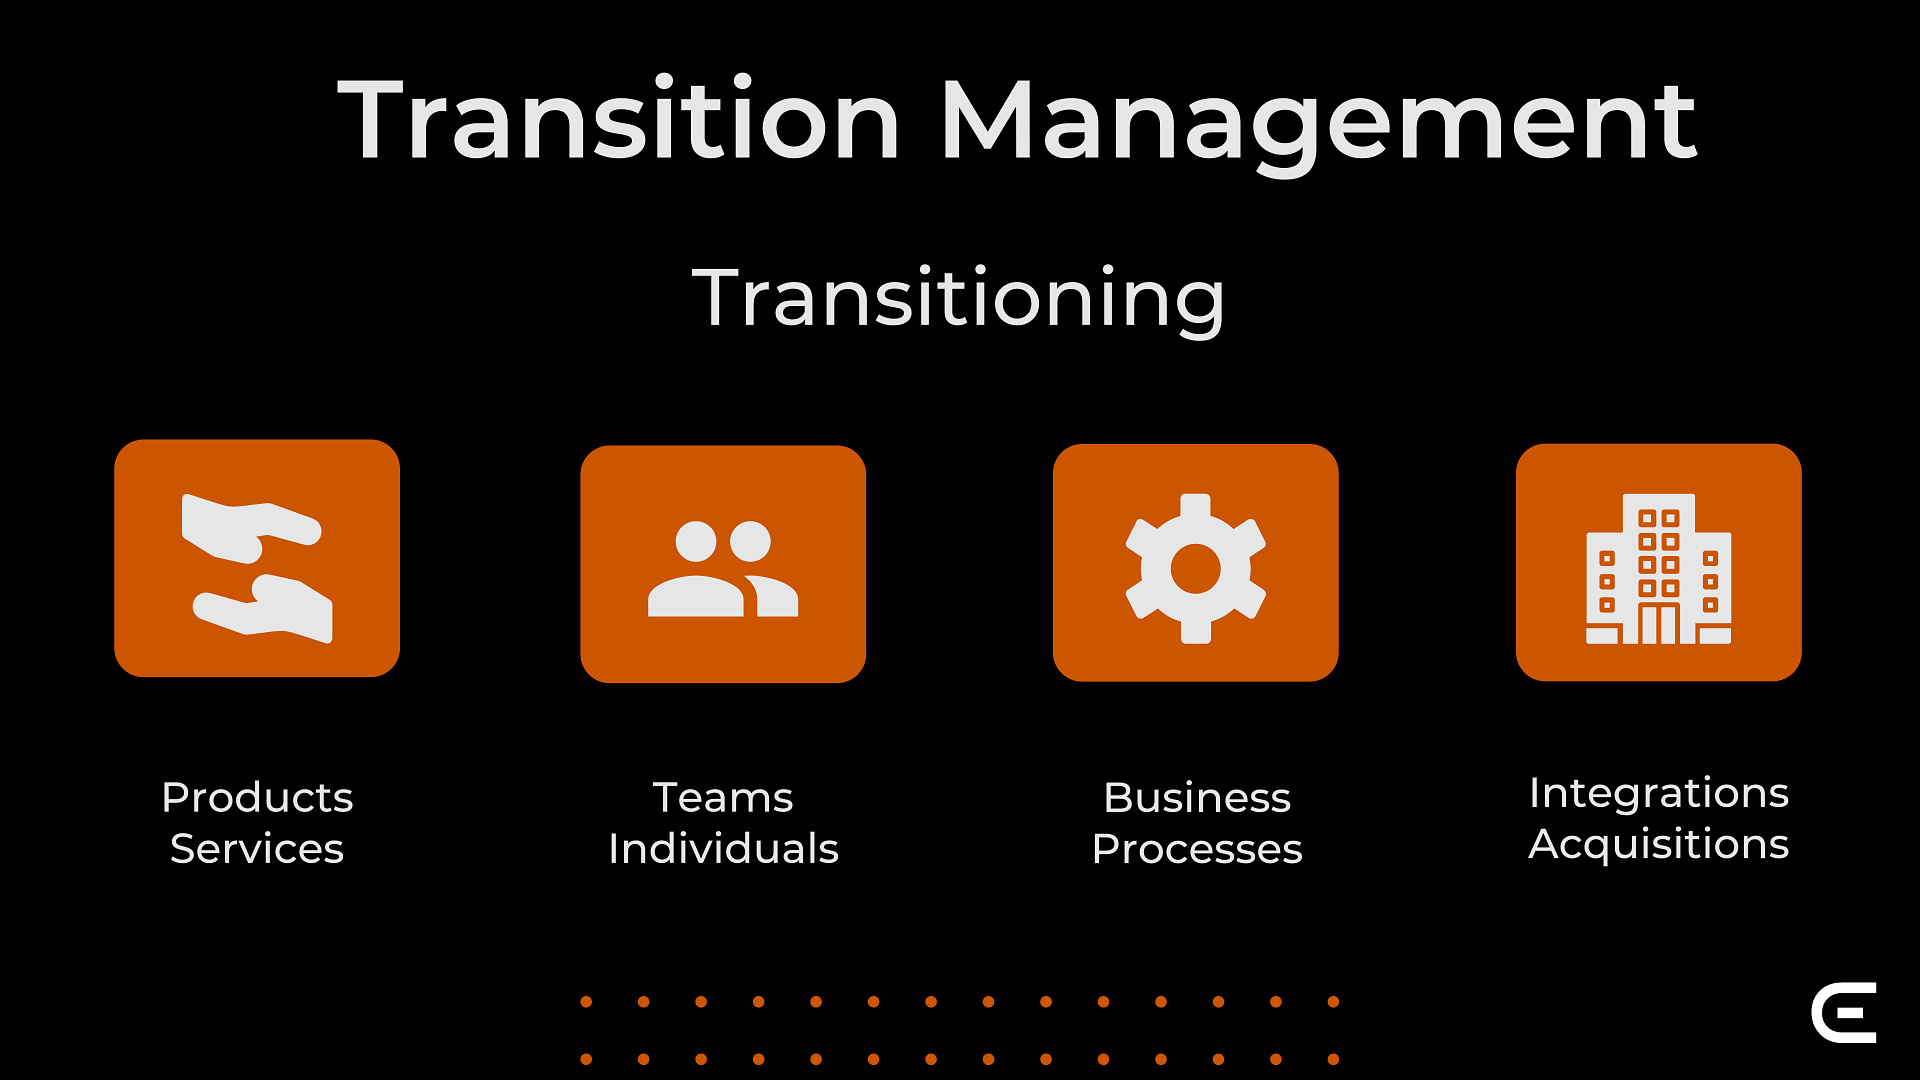 What does Transition Management Do?